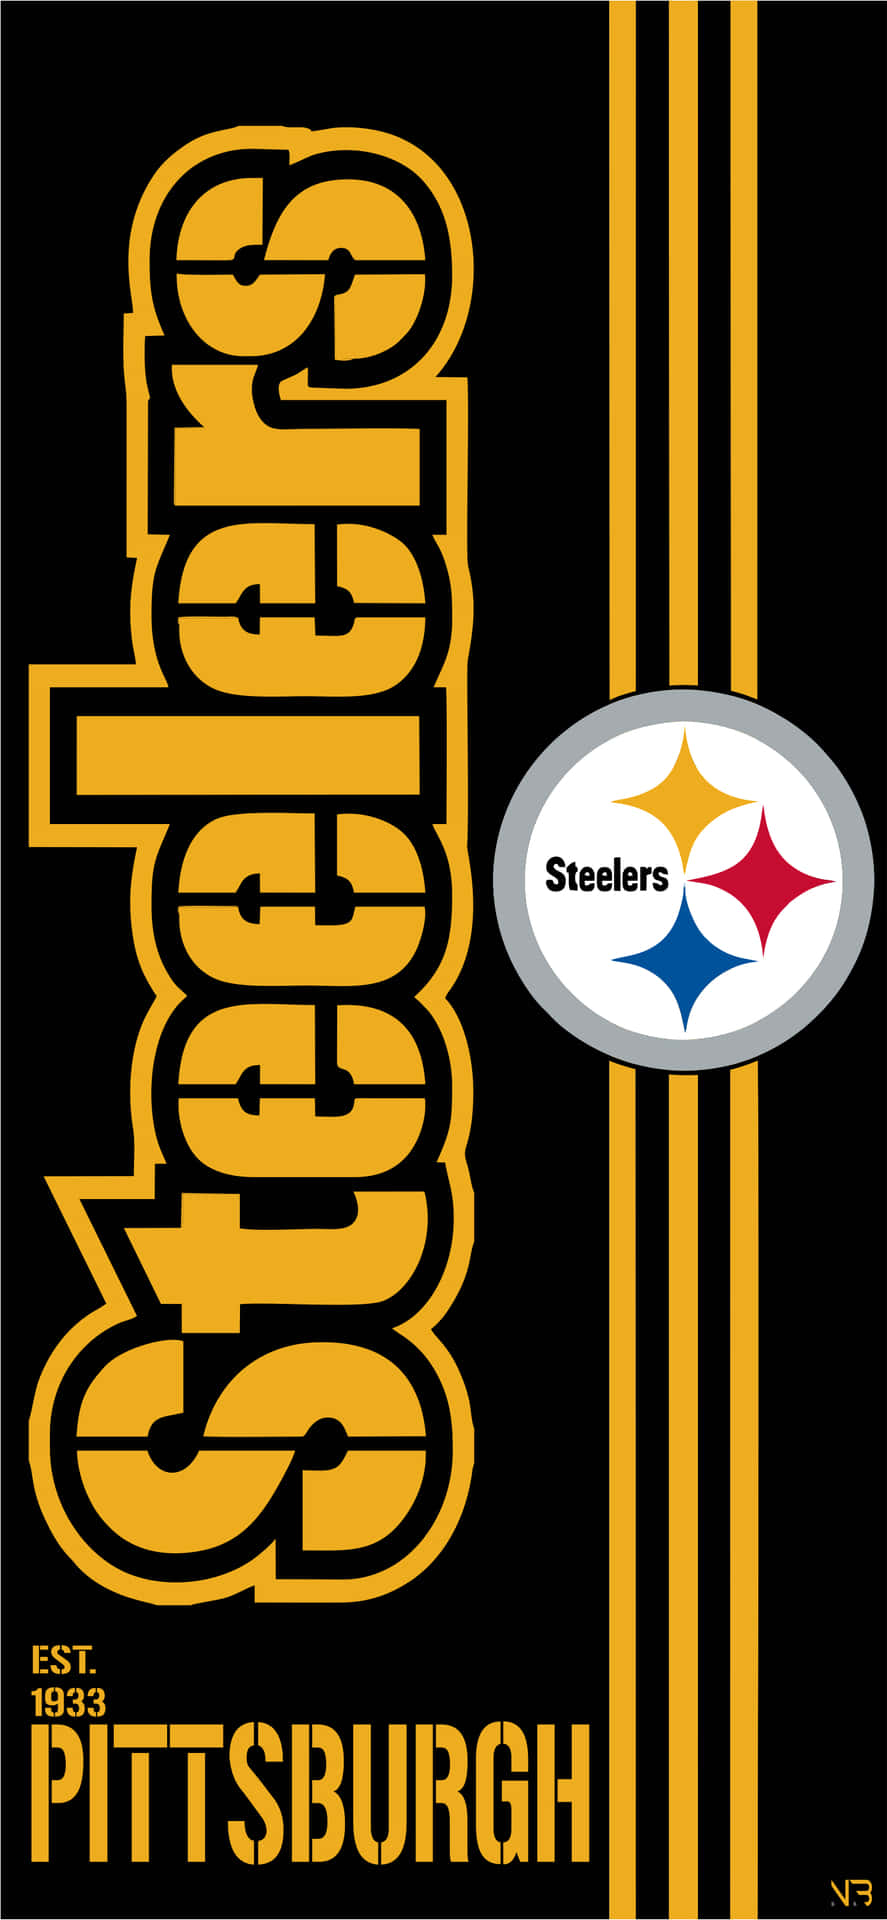 Keep the Steelers Pride Running with an iPhone Wallpaper